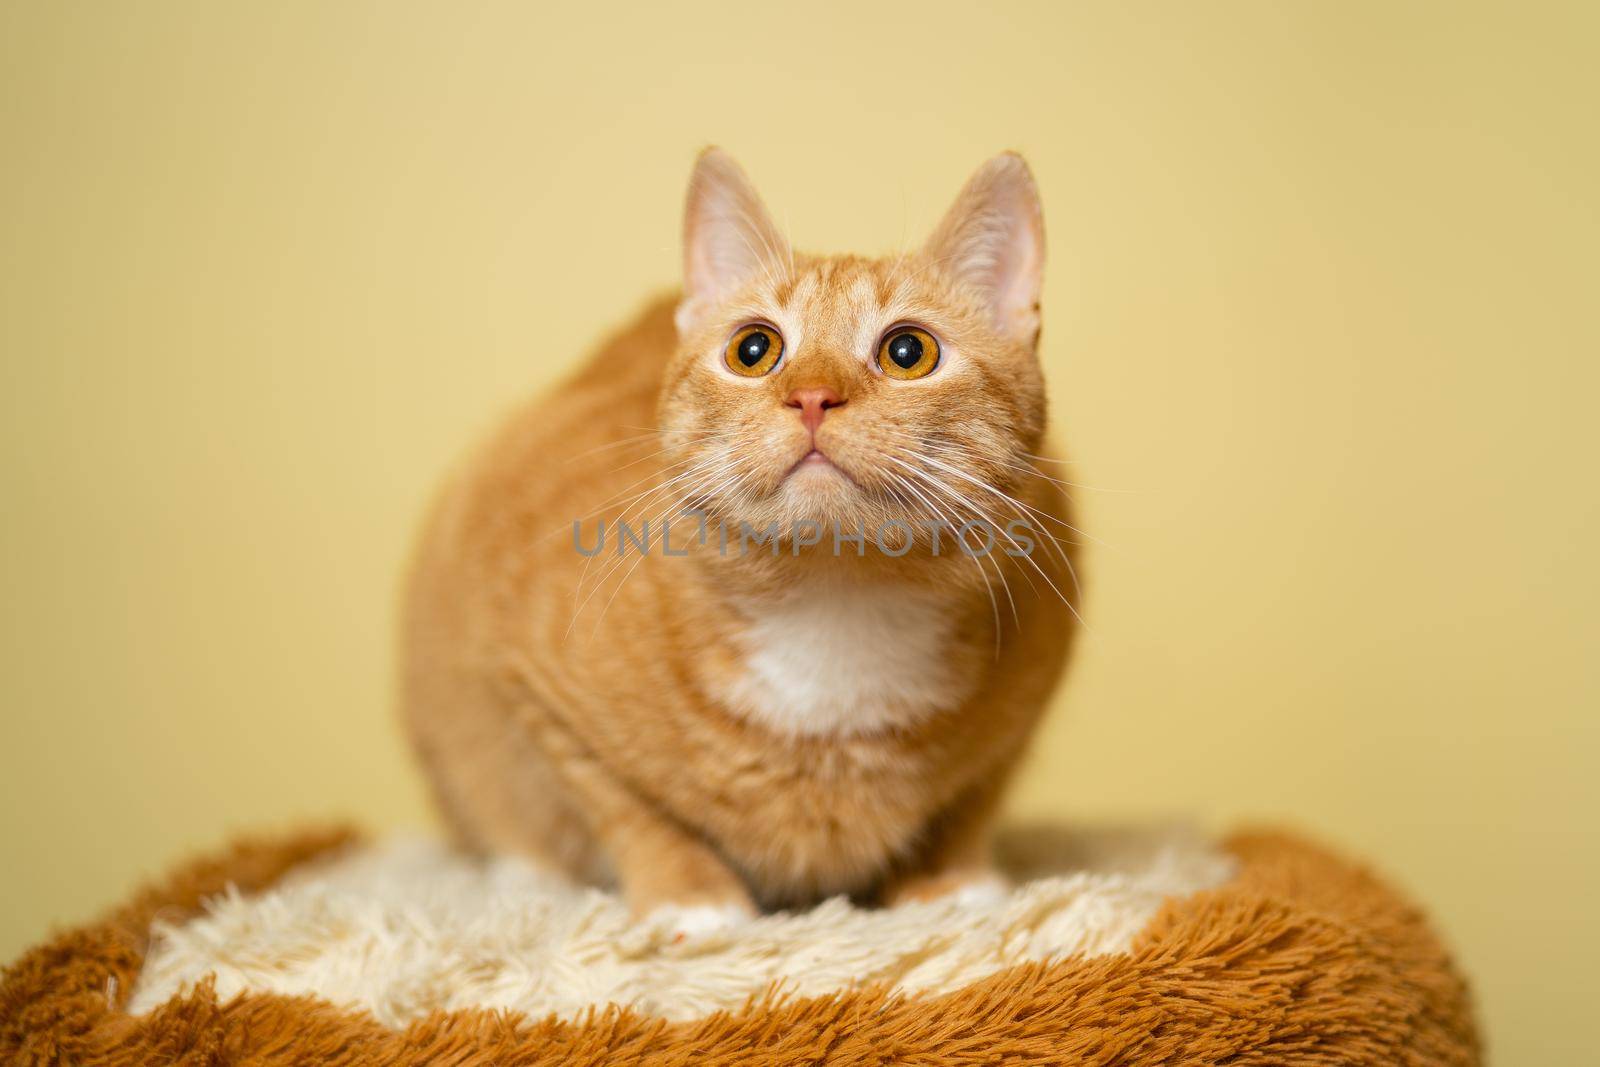 The theme of pets, love and protection of animals. Ginger cat posing on yellow background in studio. Cute orange cat. perfect pet companion. Red fluffy friend. Redhead pet animal portrait studio shot.